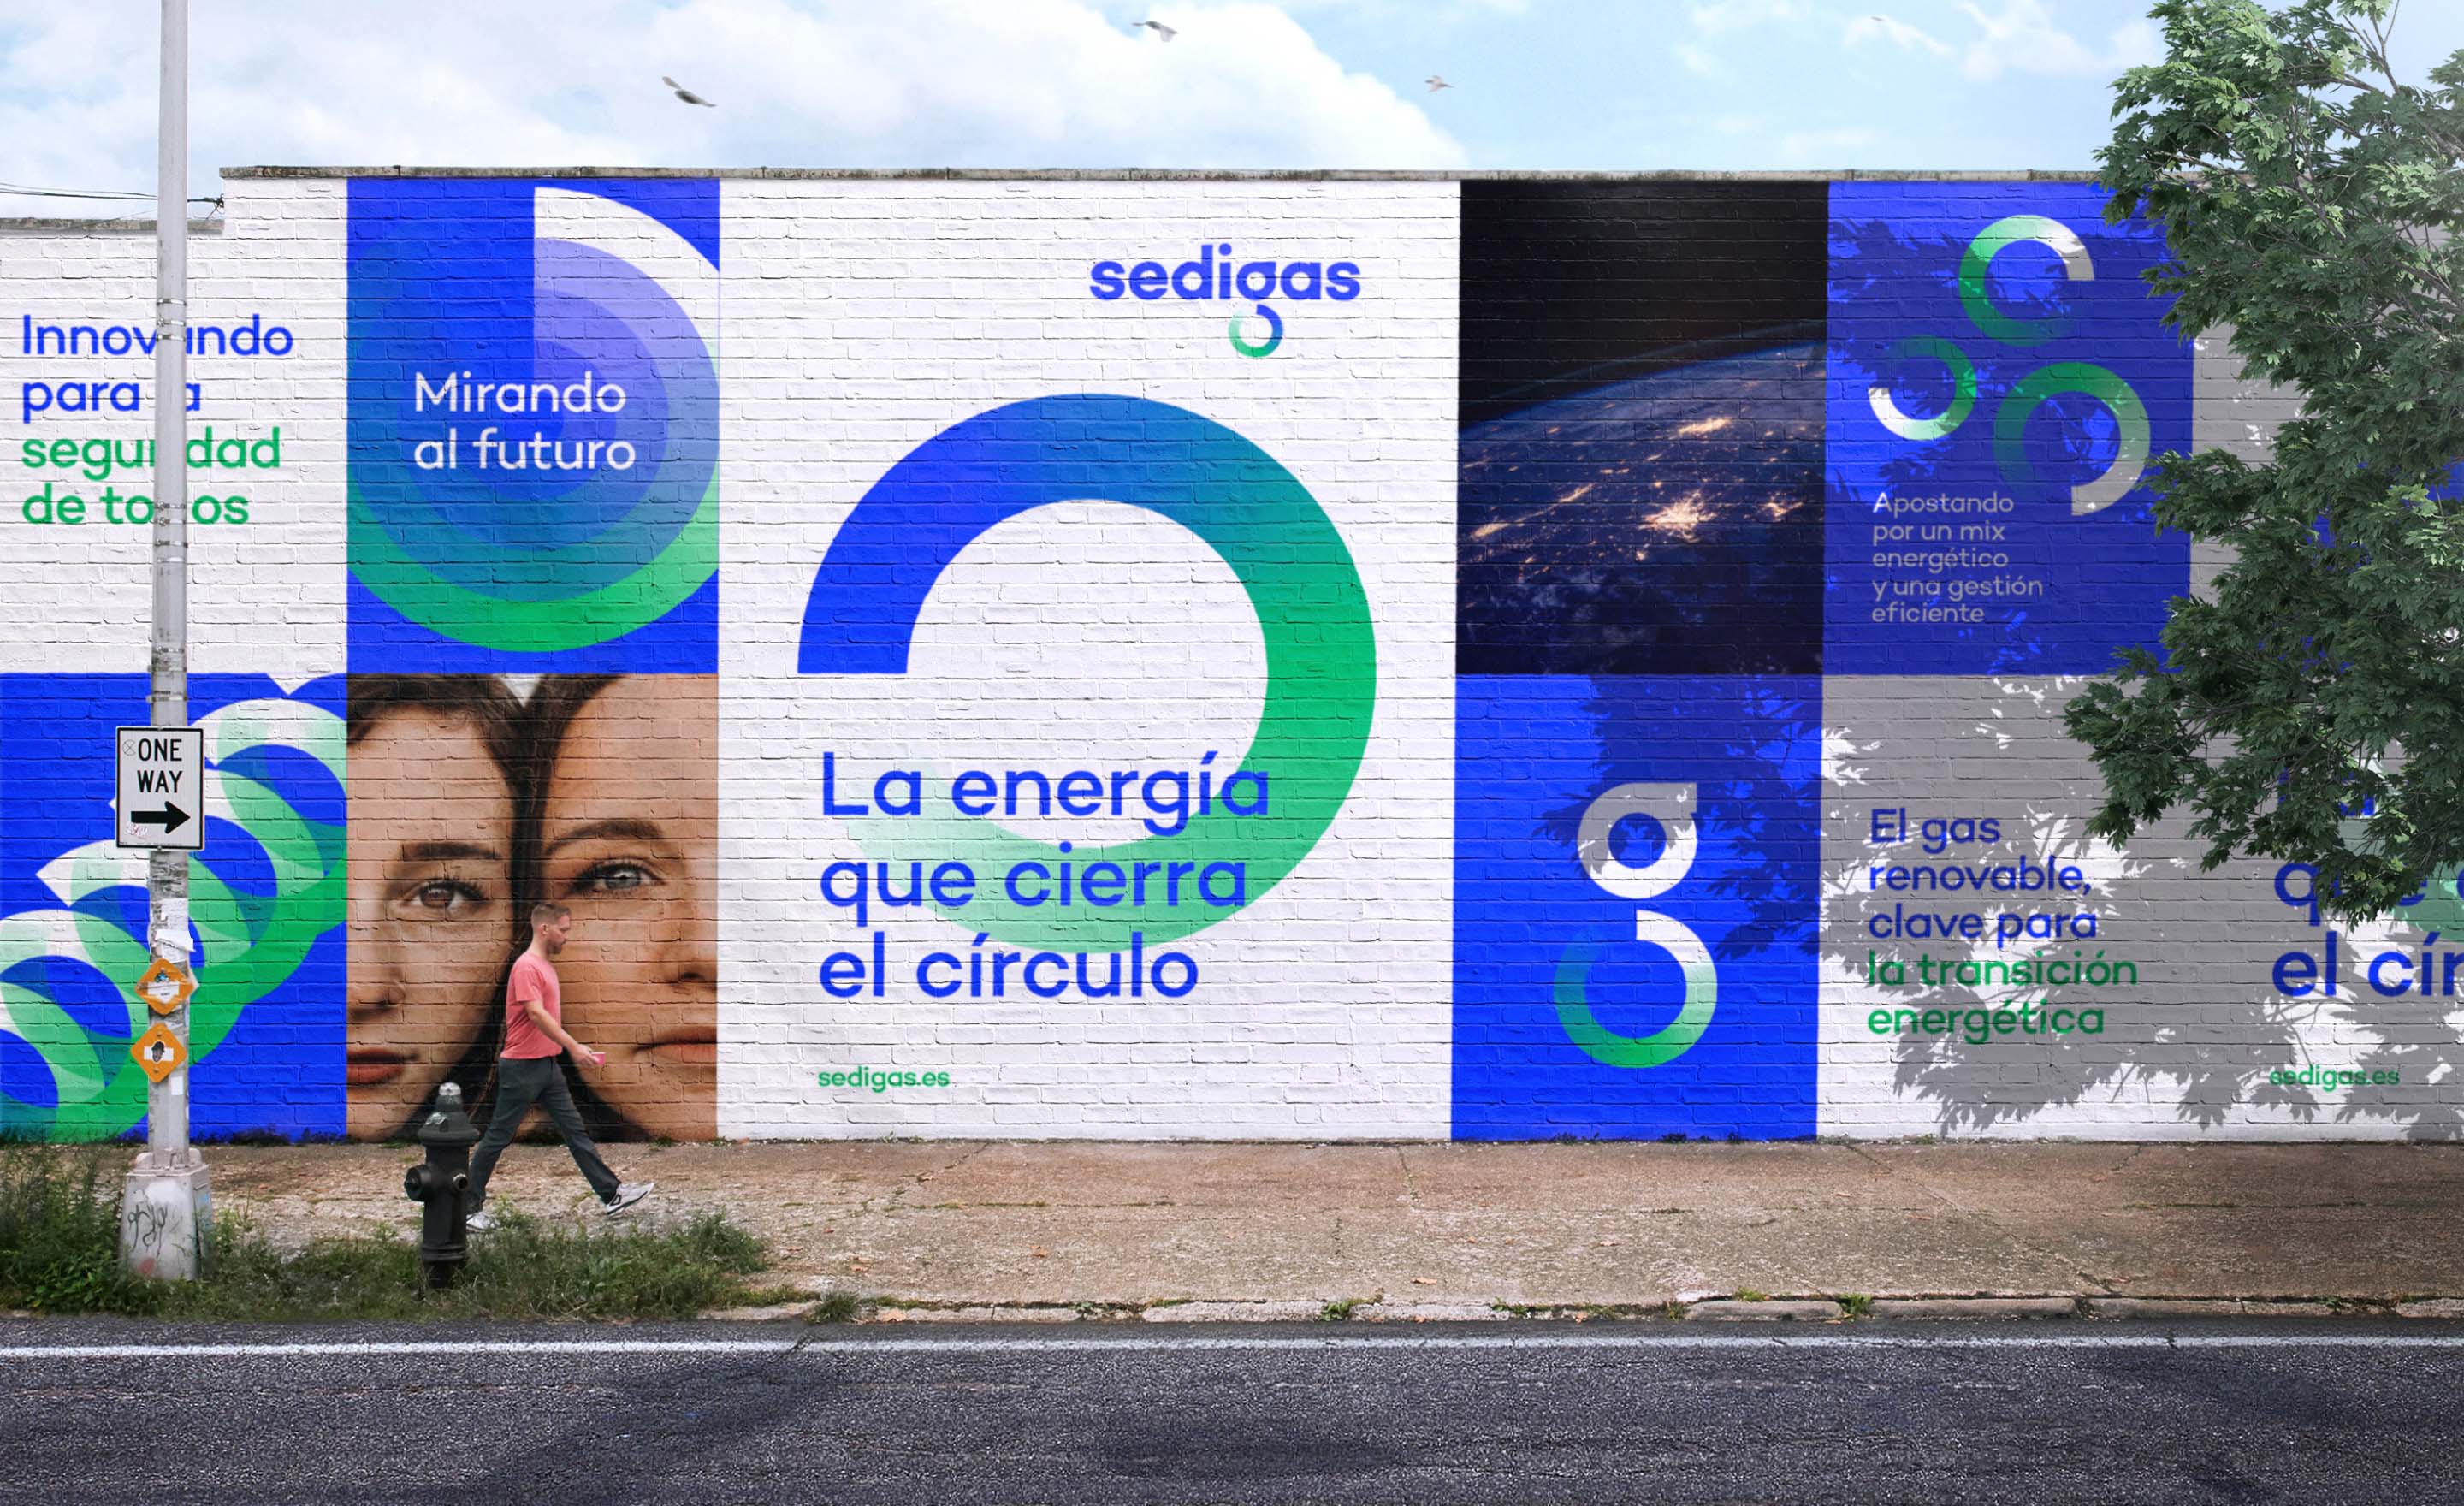 Sedigas was born to bring together the companies of the gas sector in Spain and to play an active role in the fight against climate change, proposing an energy transition based on its holistic knowledge of energy.
